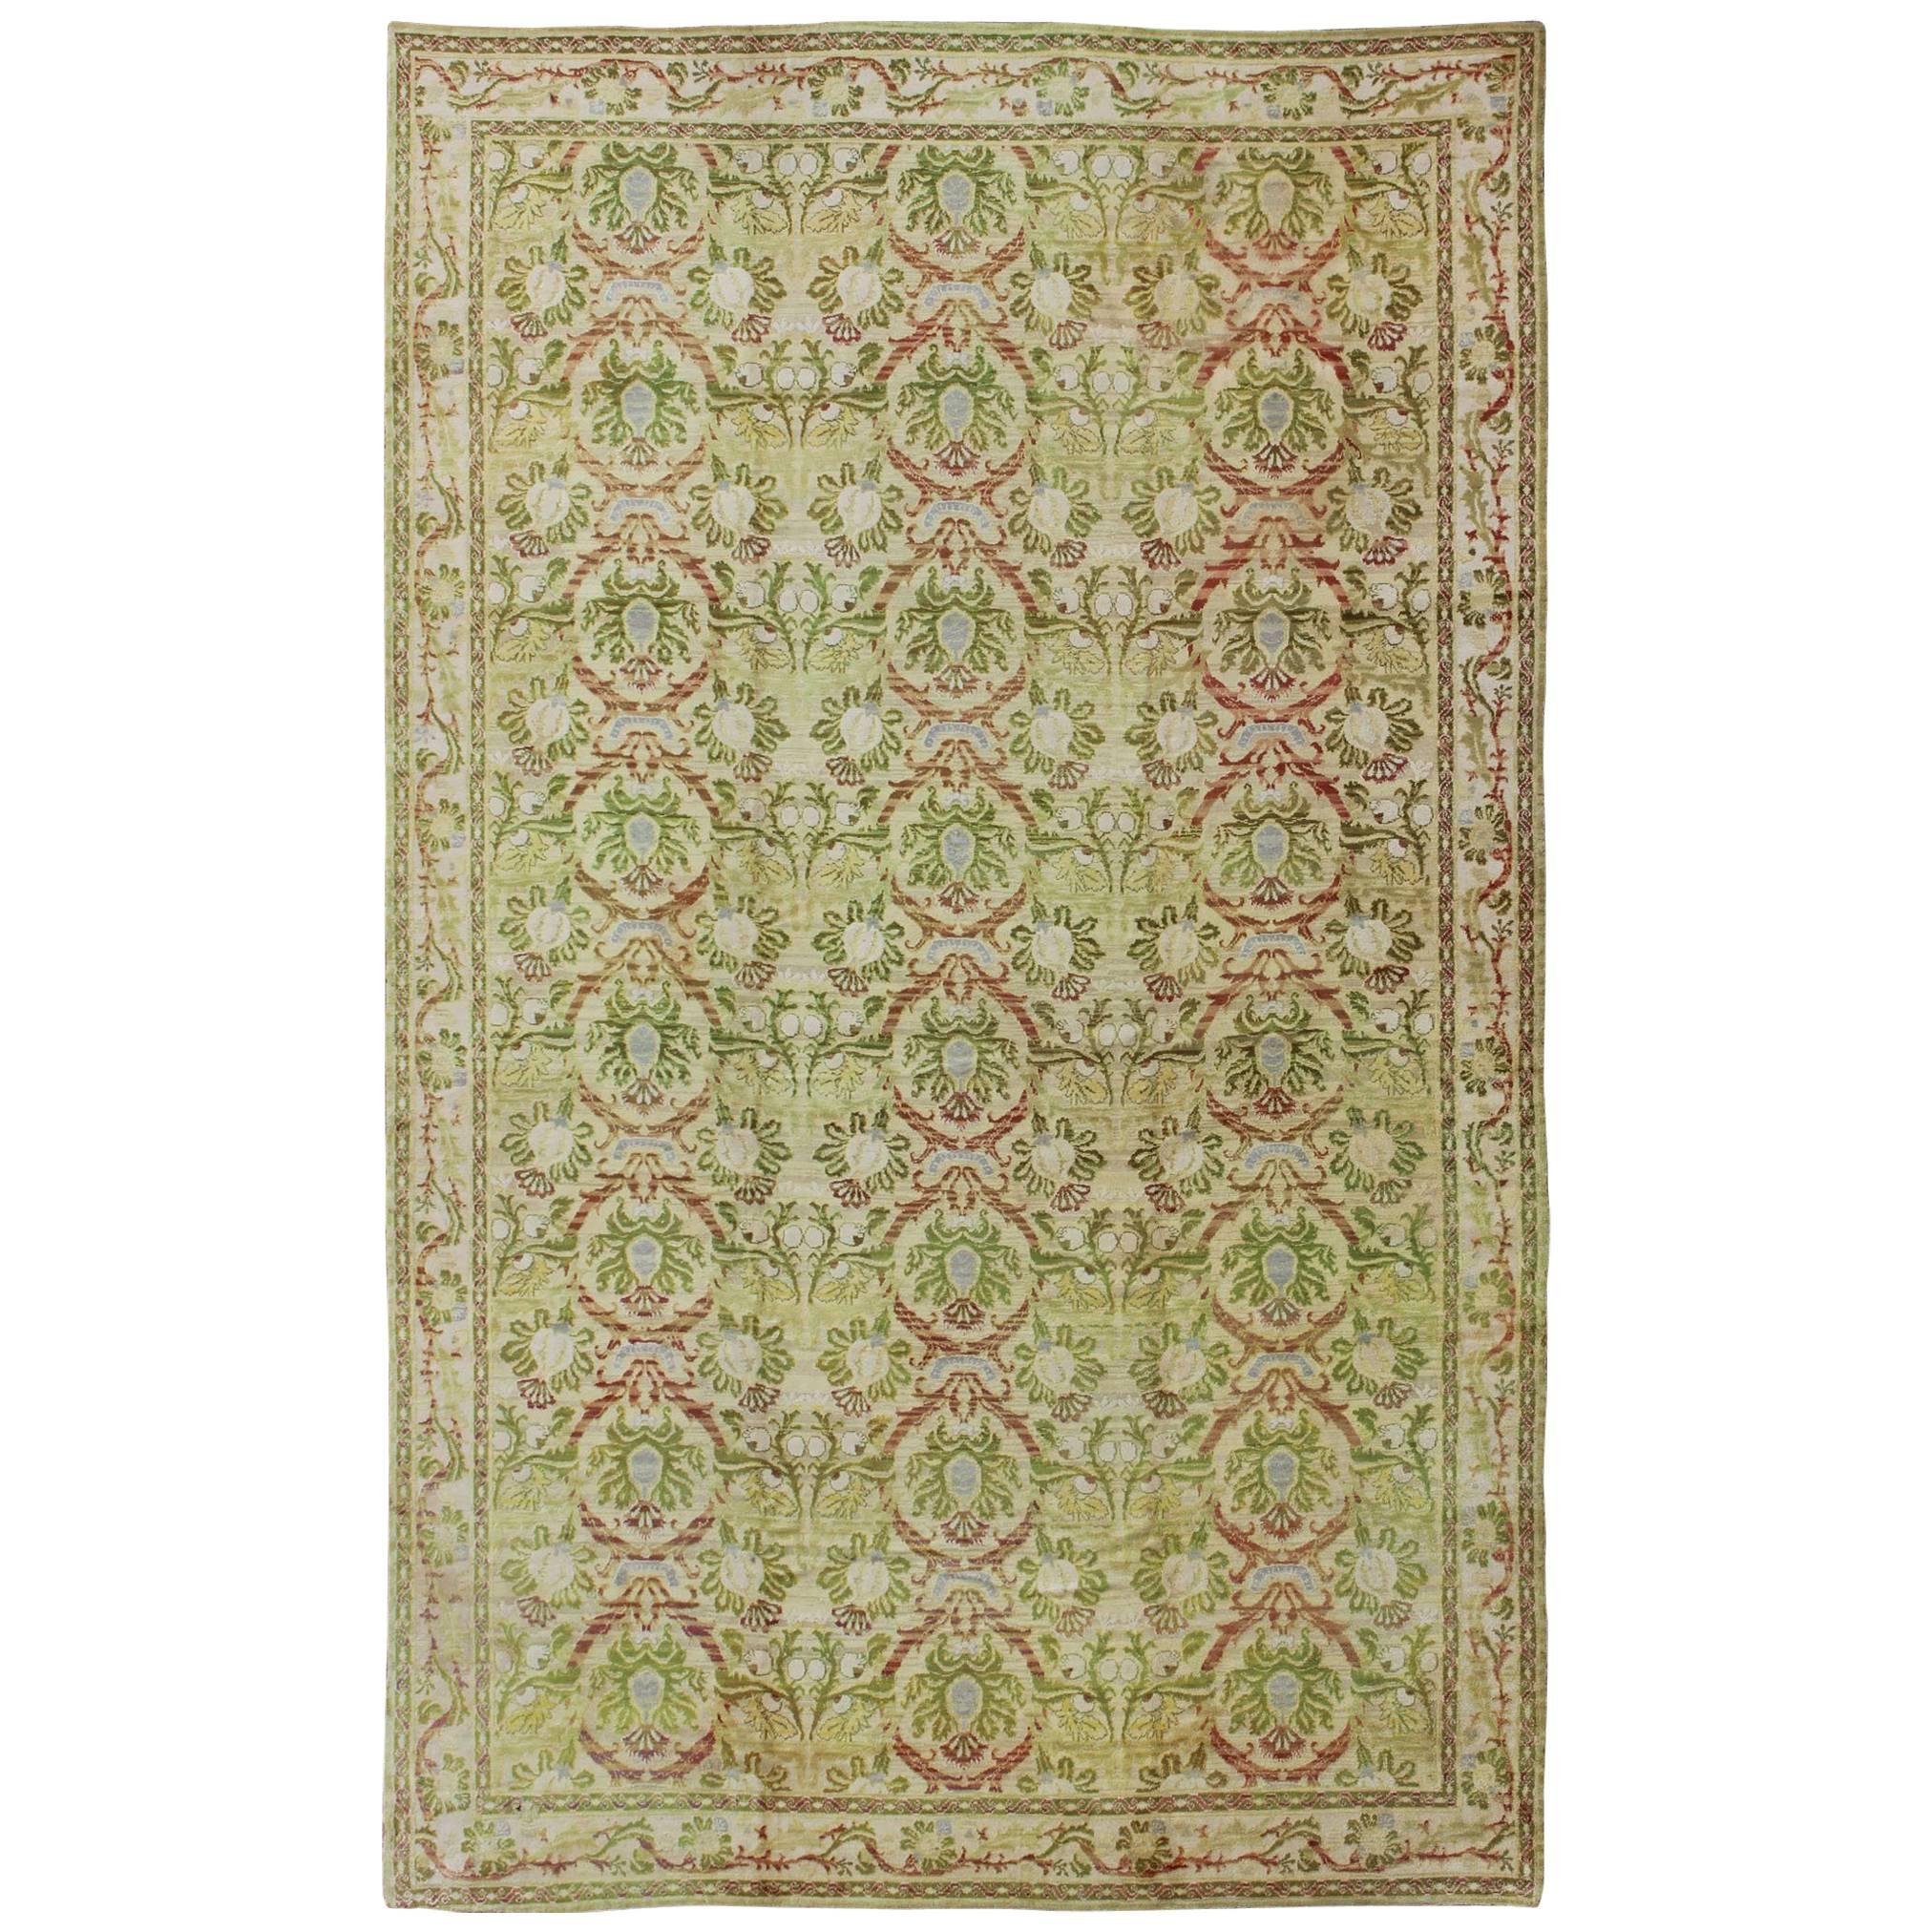 Large Antique Spanish Rug with Circular Medallions in Various Green Tones 